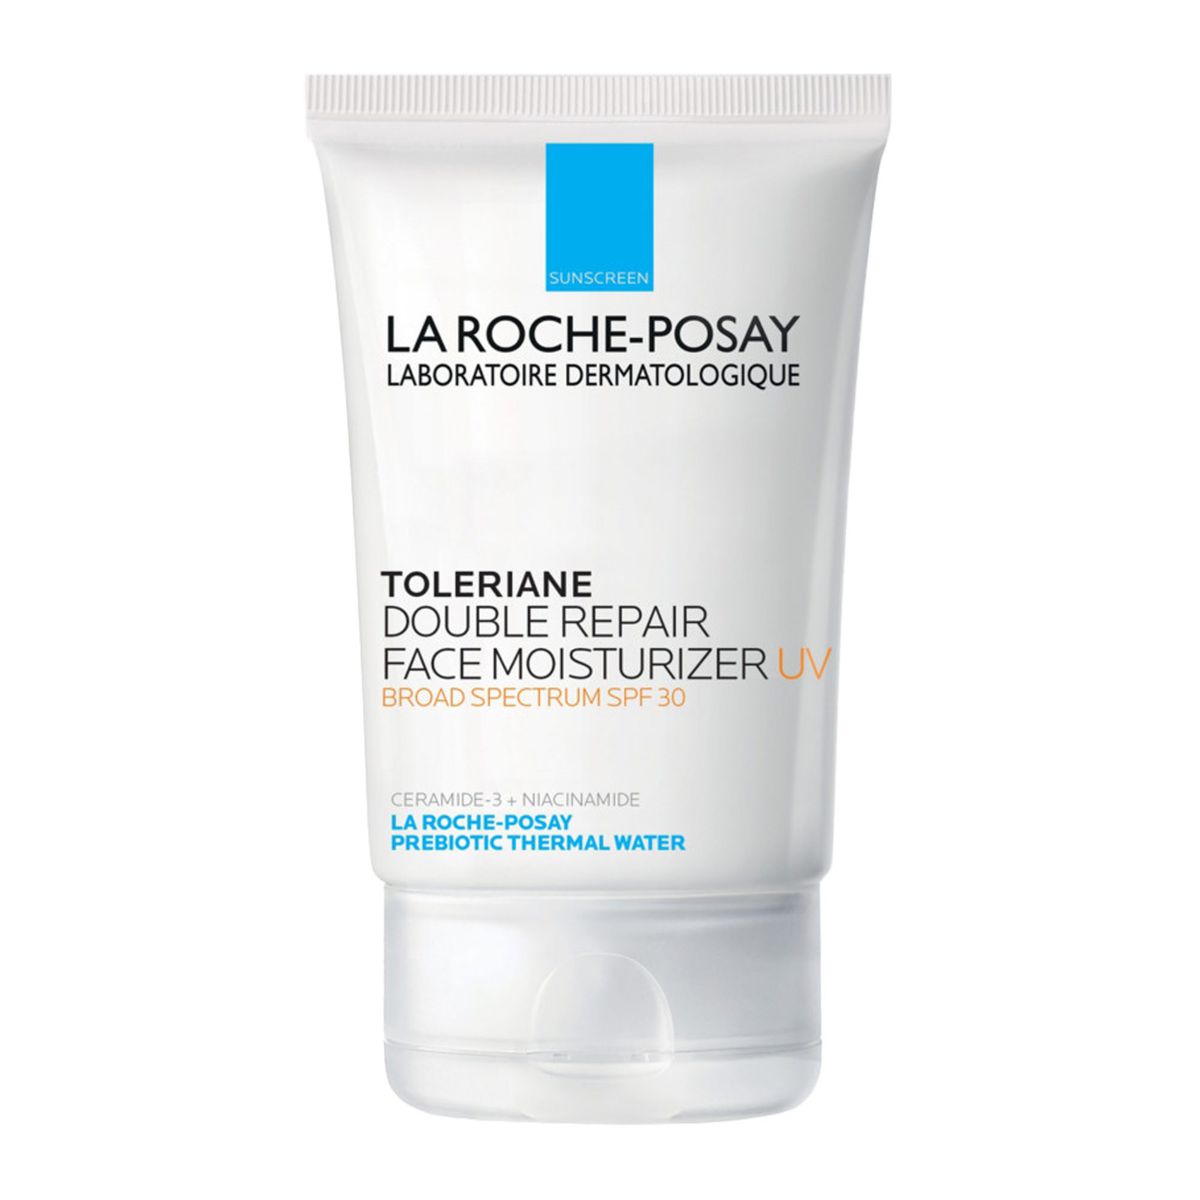 La-Roche-Posay-The-Best-Sunscreen-for-Face-Under-Makeup-Products